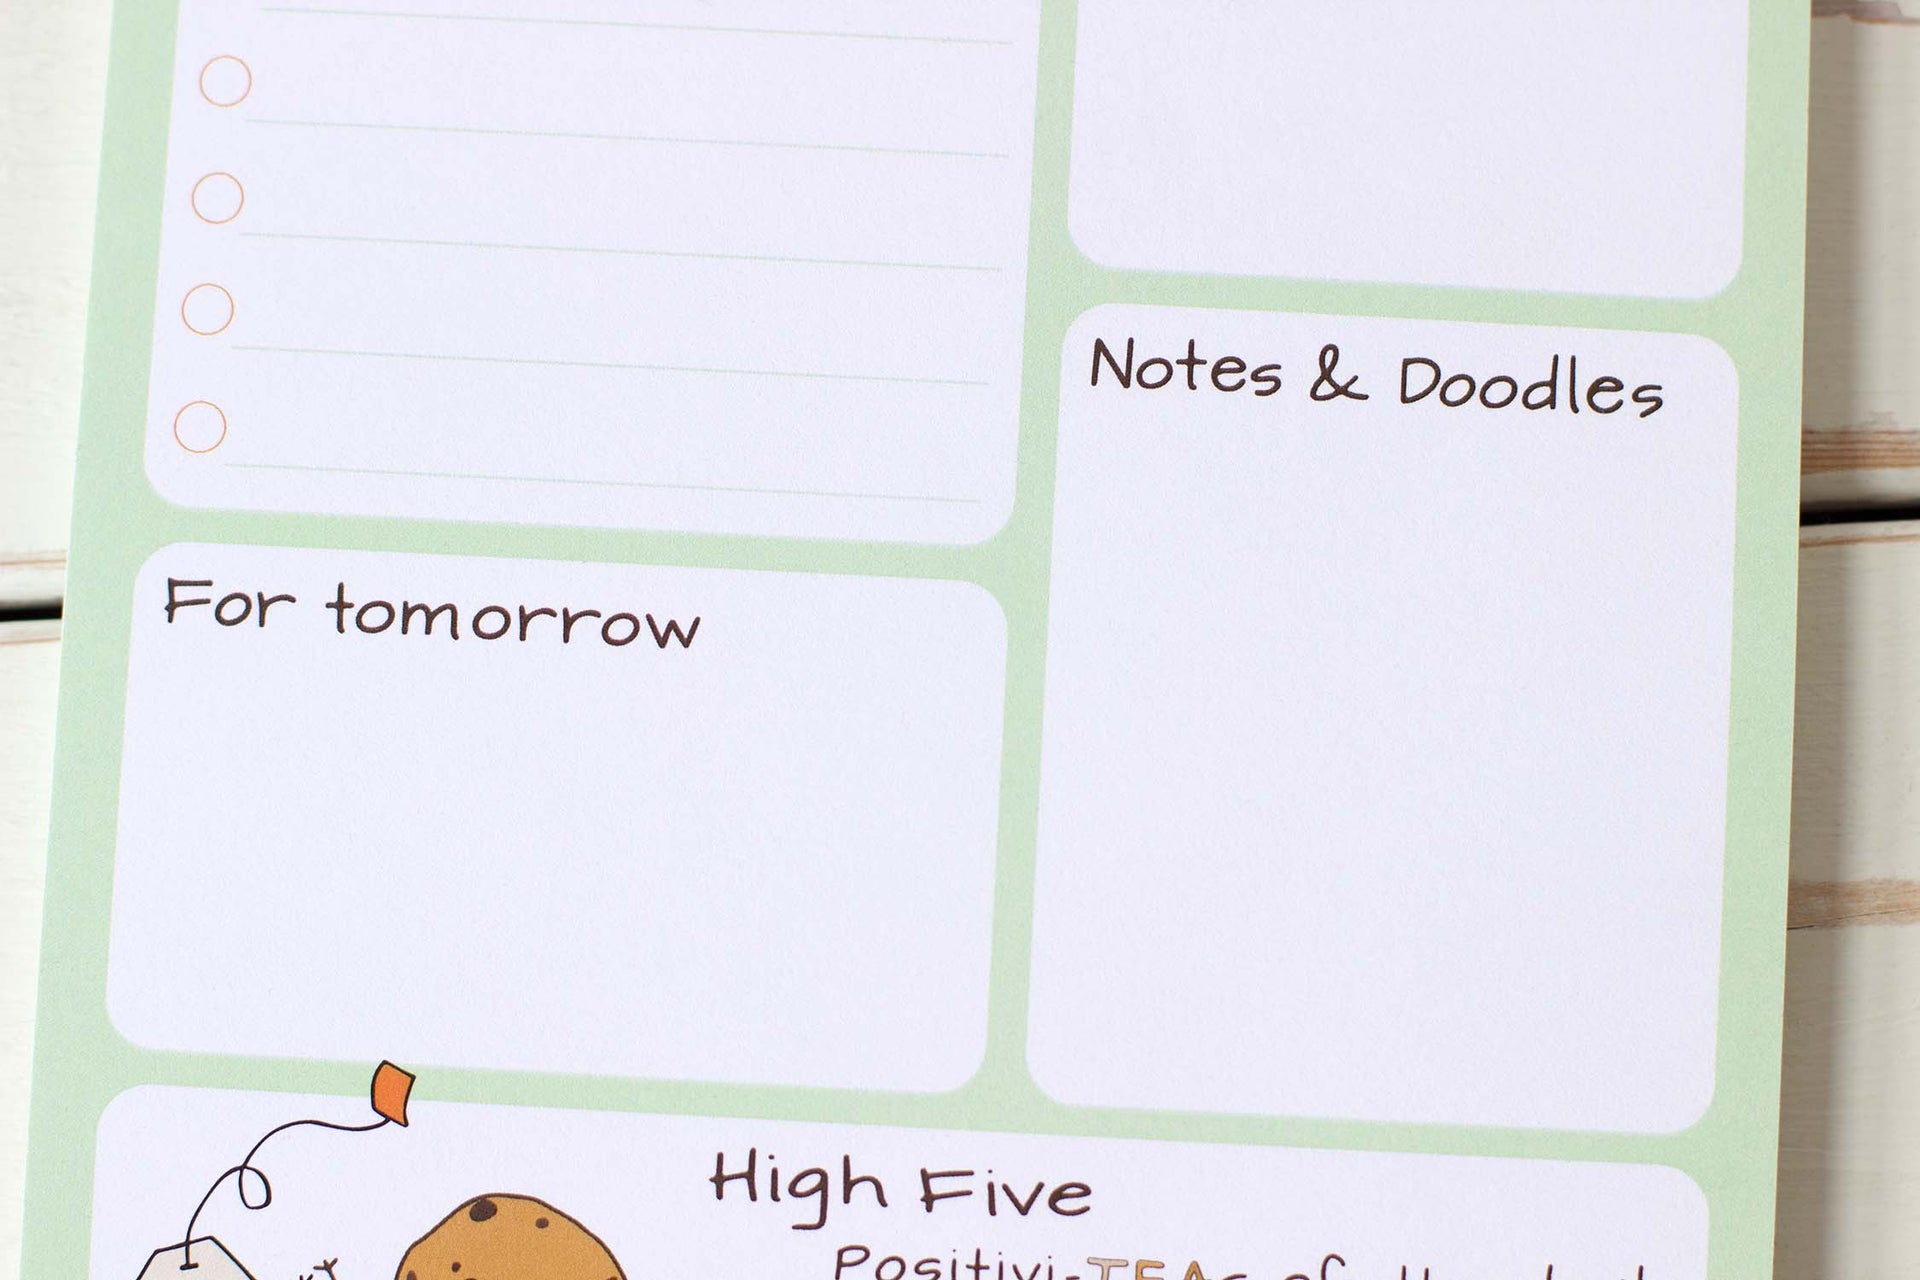 There is also sections on the notepad to write reminders/list for tomorrow and a space for Notes and Doodles